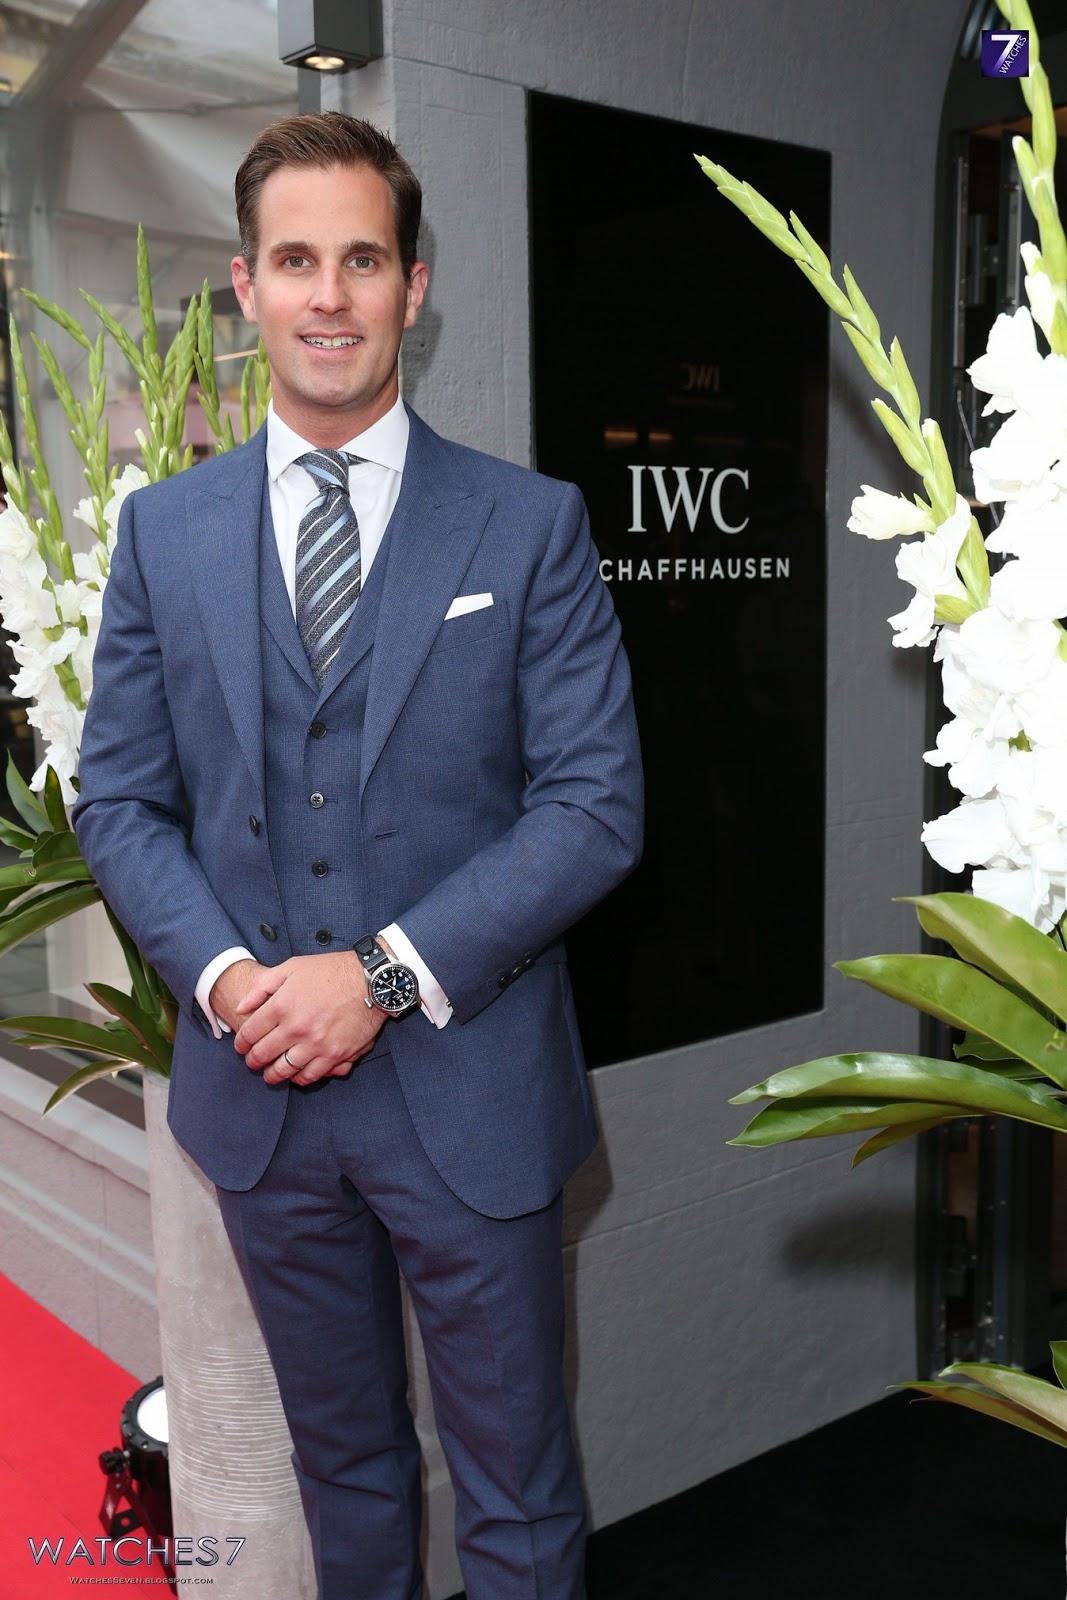 IWC SCHAFFHAUSEN, BIG PILOT, REF IW500923 single piece 5N gold wristwatch  with date, power reserve and special engraving, was worn by Bradley Cooper  at the 91st Academy Awards®